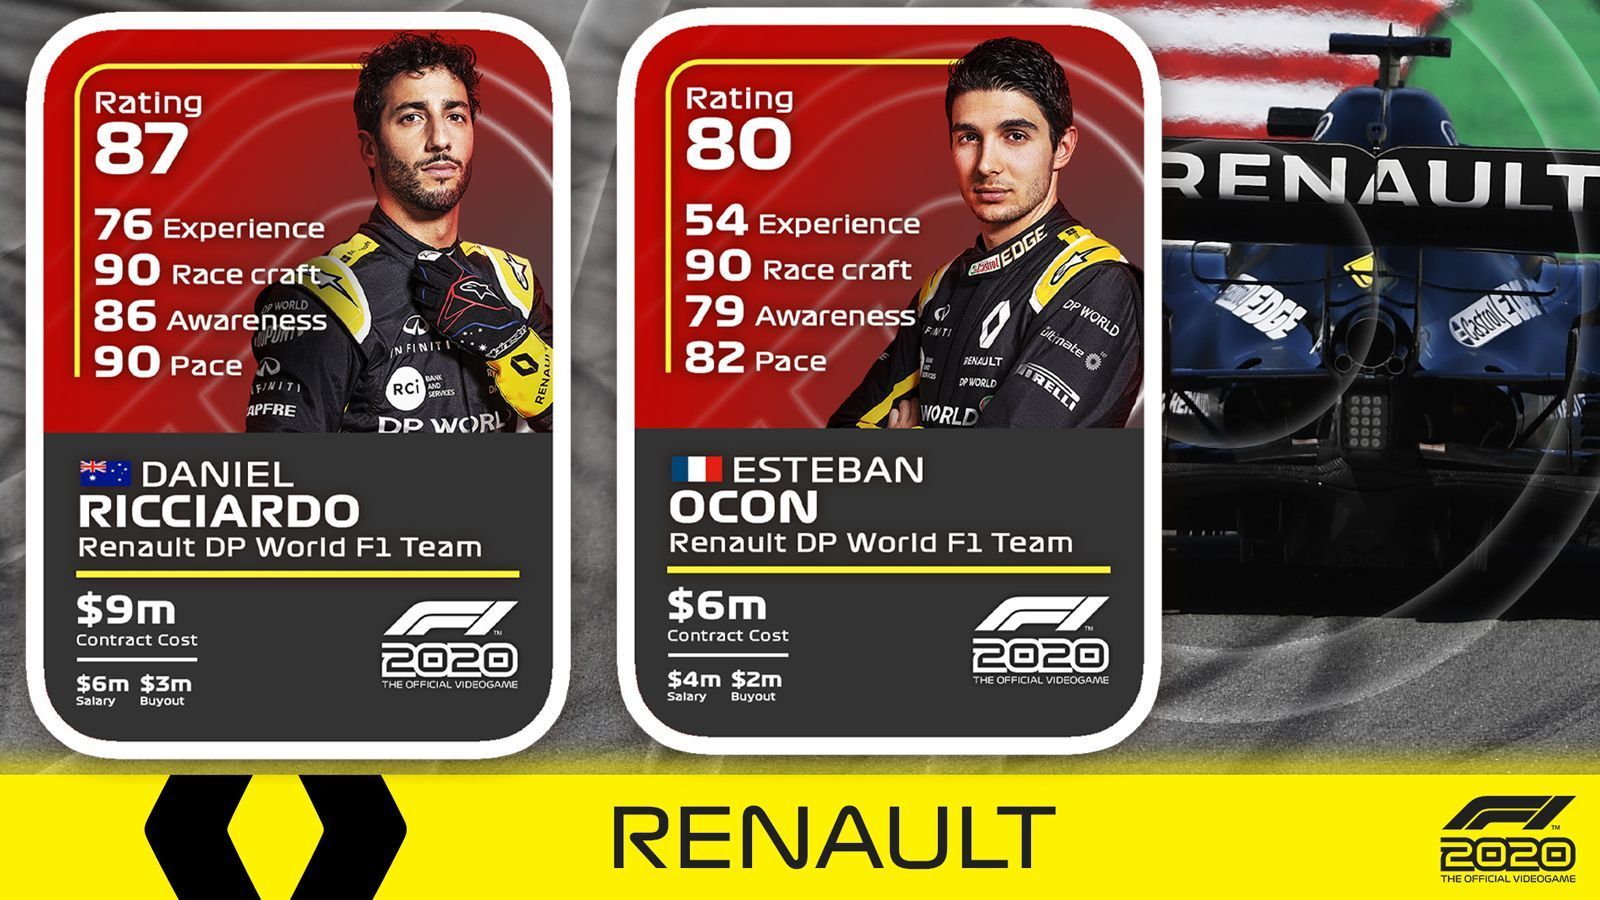 
                <strong>Renault</strong><br>
                Daniel Ricciardo Erfahrung 76, Fahrkunst 90, Bewusstsein 86, Pace 90, Overall Rating 87Esteban Ocon: Erfahrung 54, Fahrkunst 90, Bewusstsein 79, Pace 82, Overall Rating 80
              